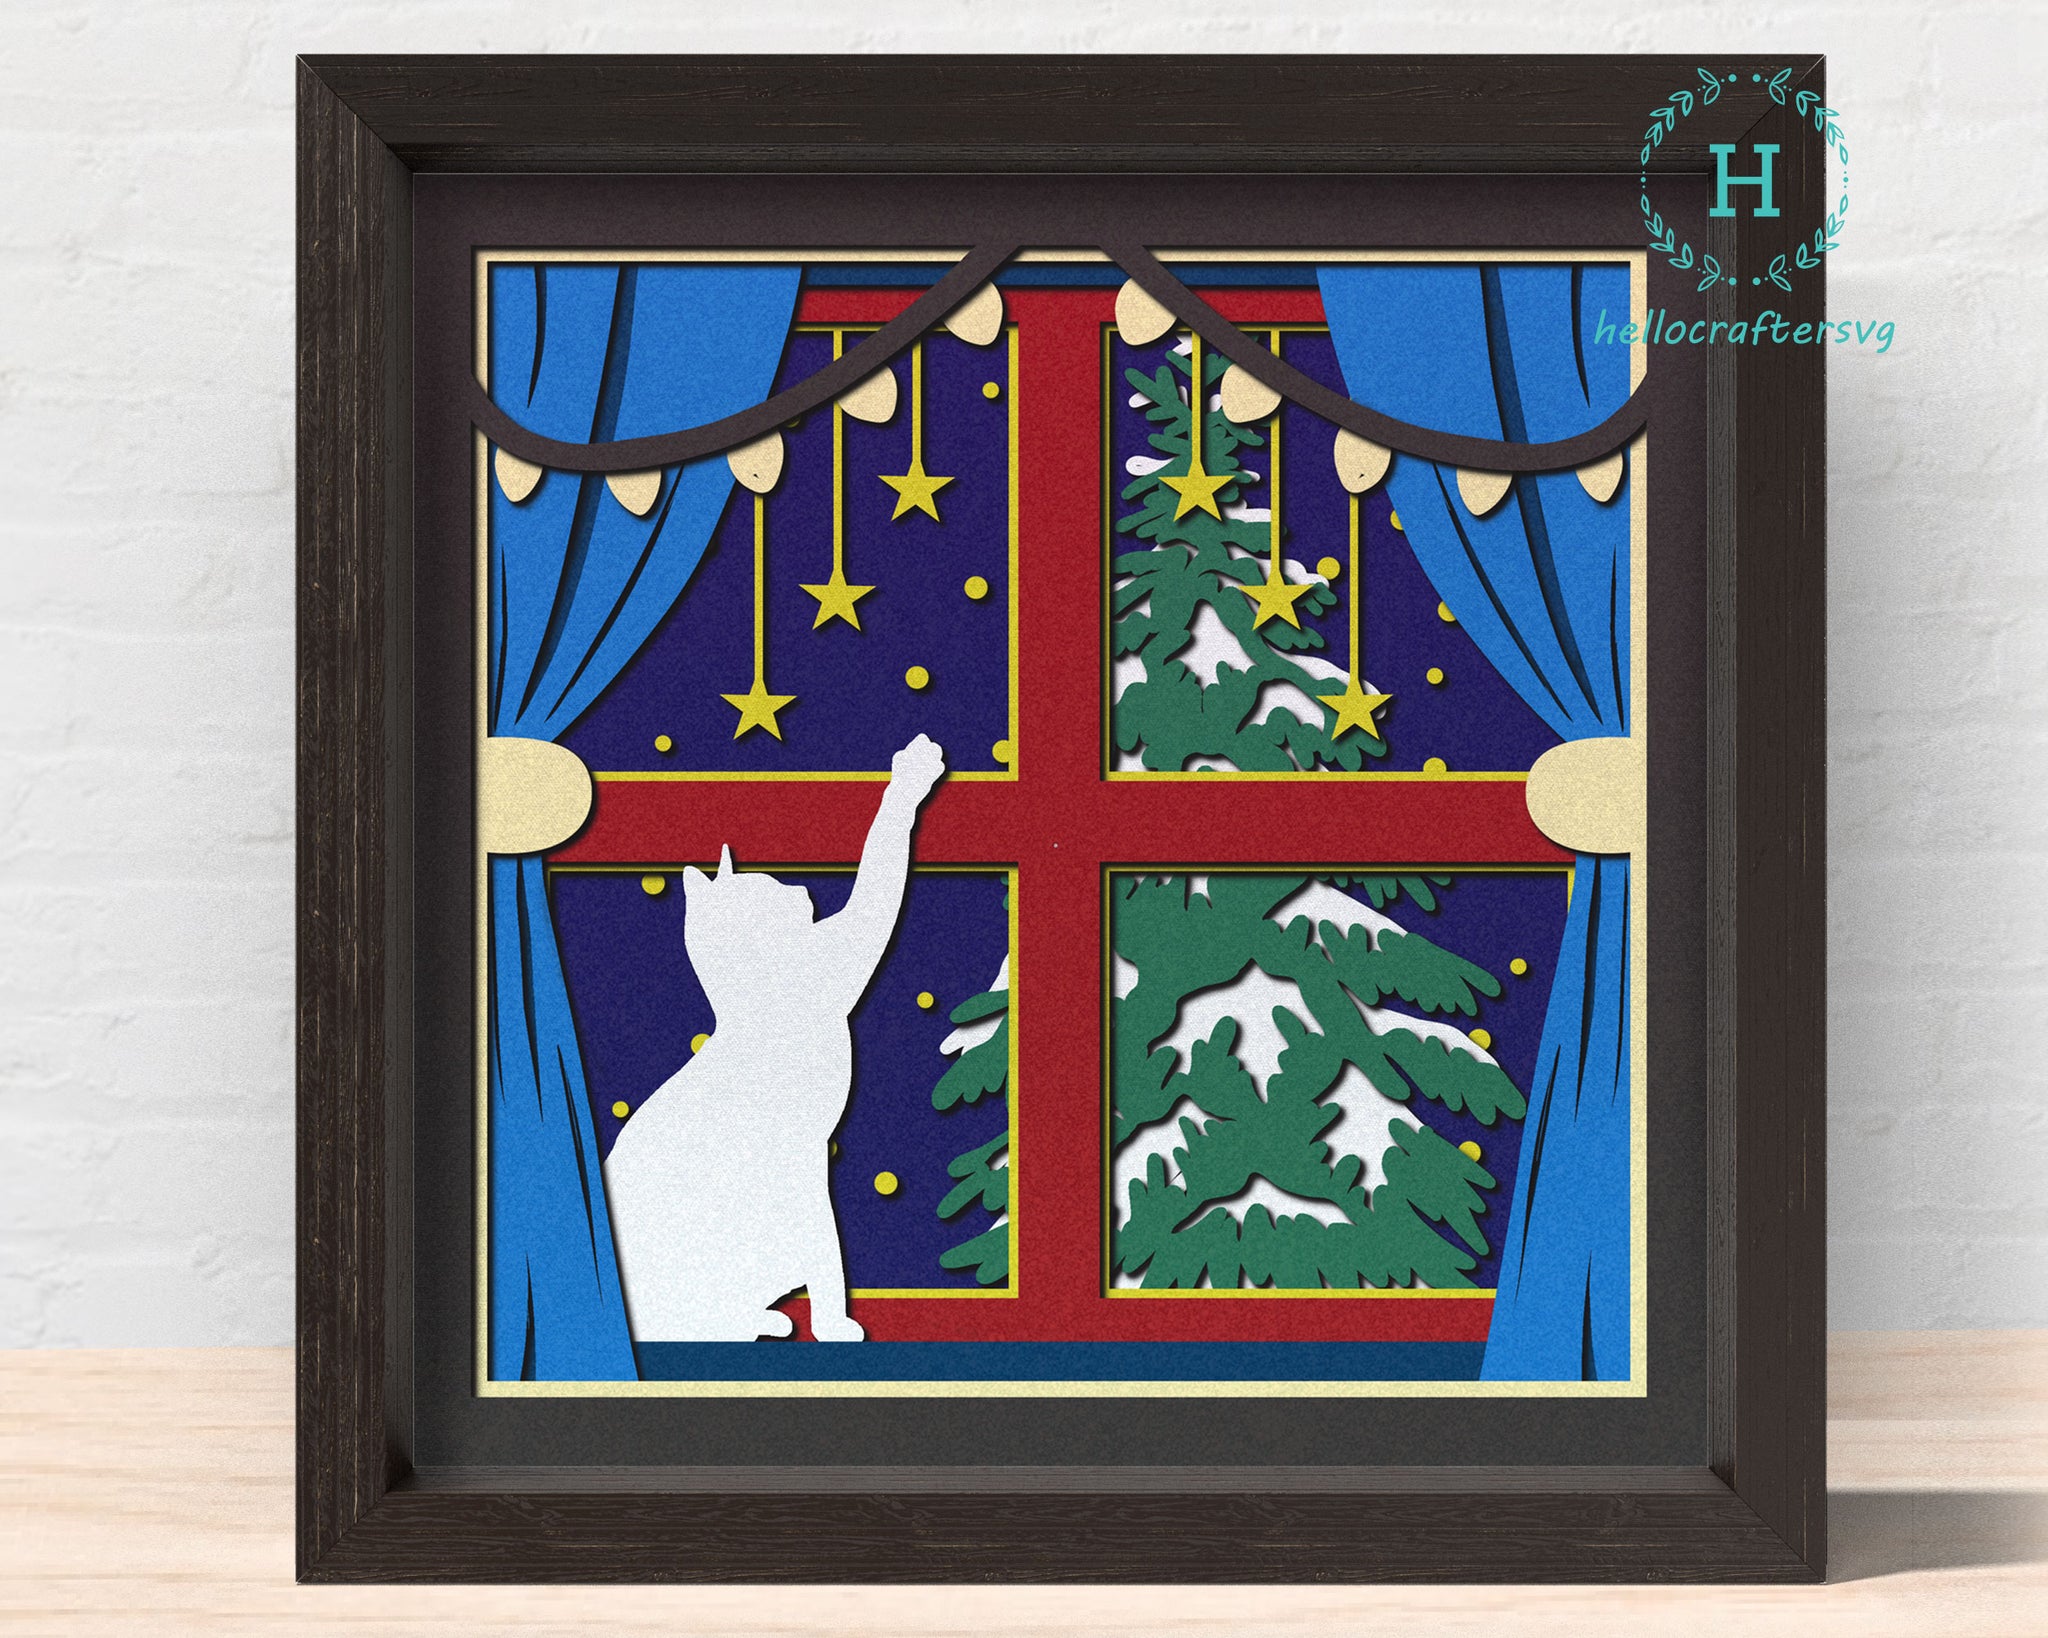 3d CHRISTMAS CAT Svg, CAT On Window Shadow Box Svg - Cricut Files, Cardstock Svg, Silhouette Files - HelloCrafterSvg